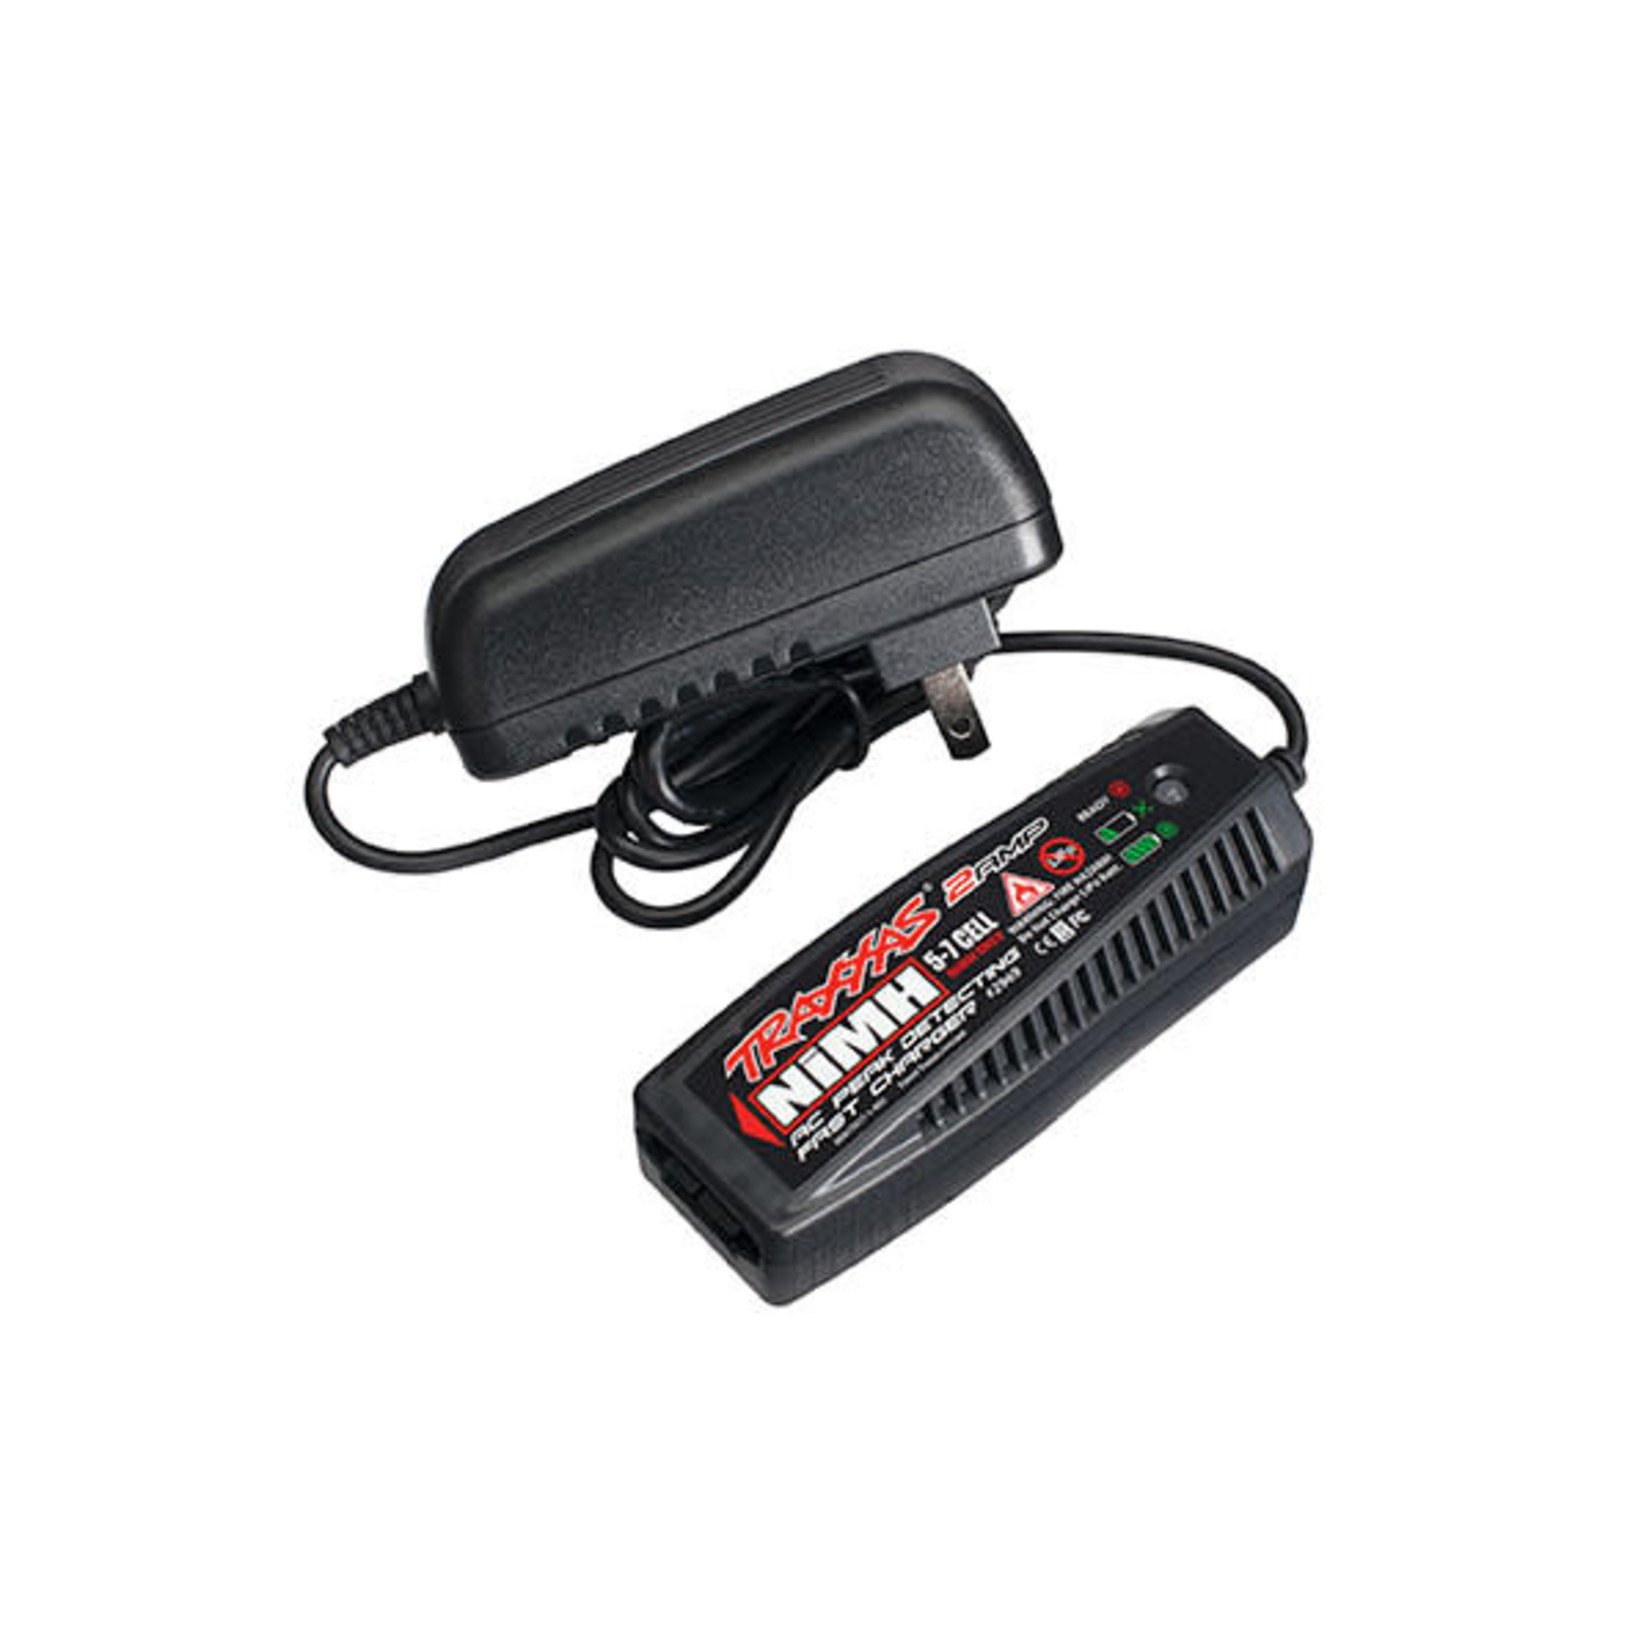 Traxxas 2AMP CHARGER AC